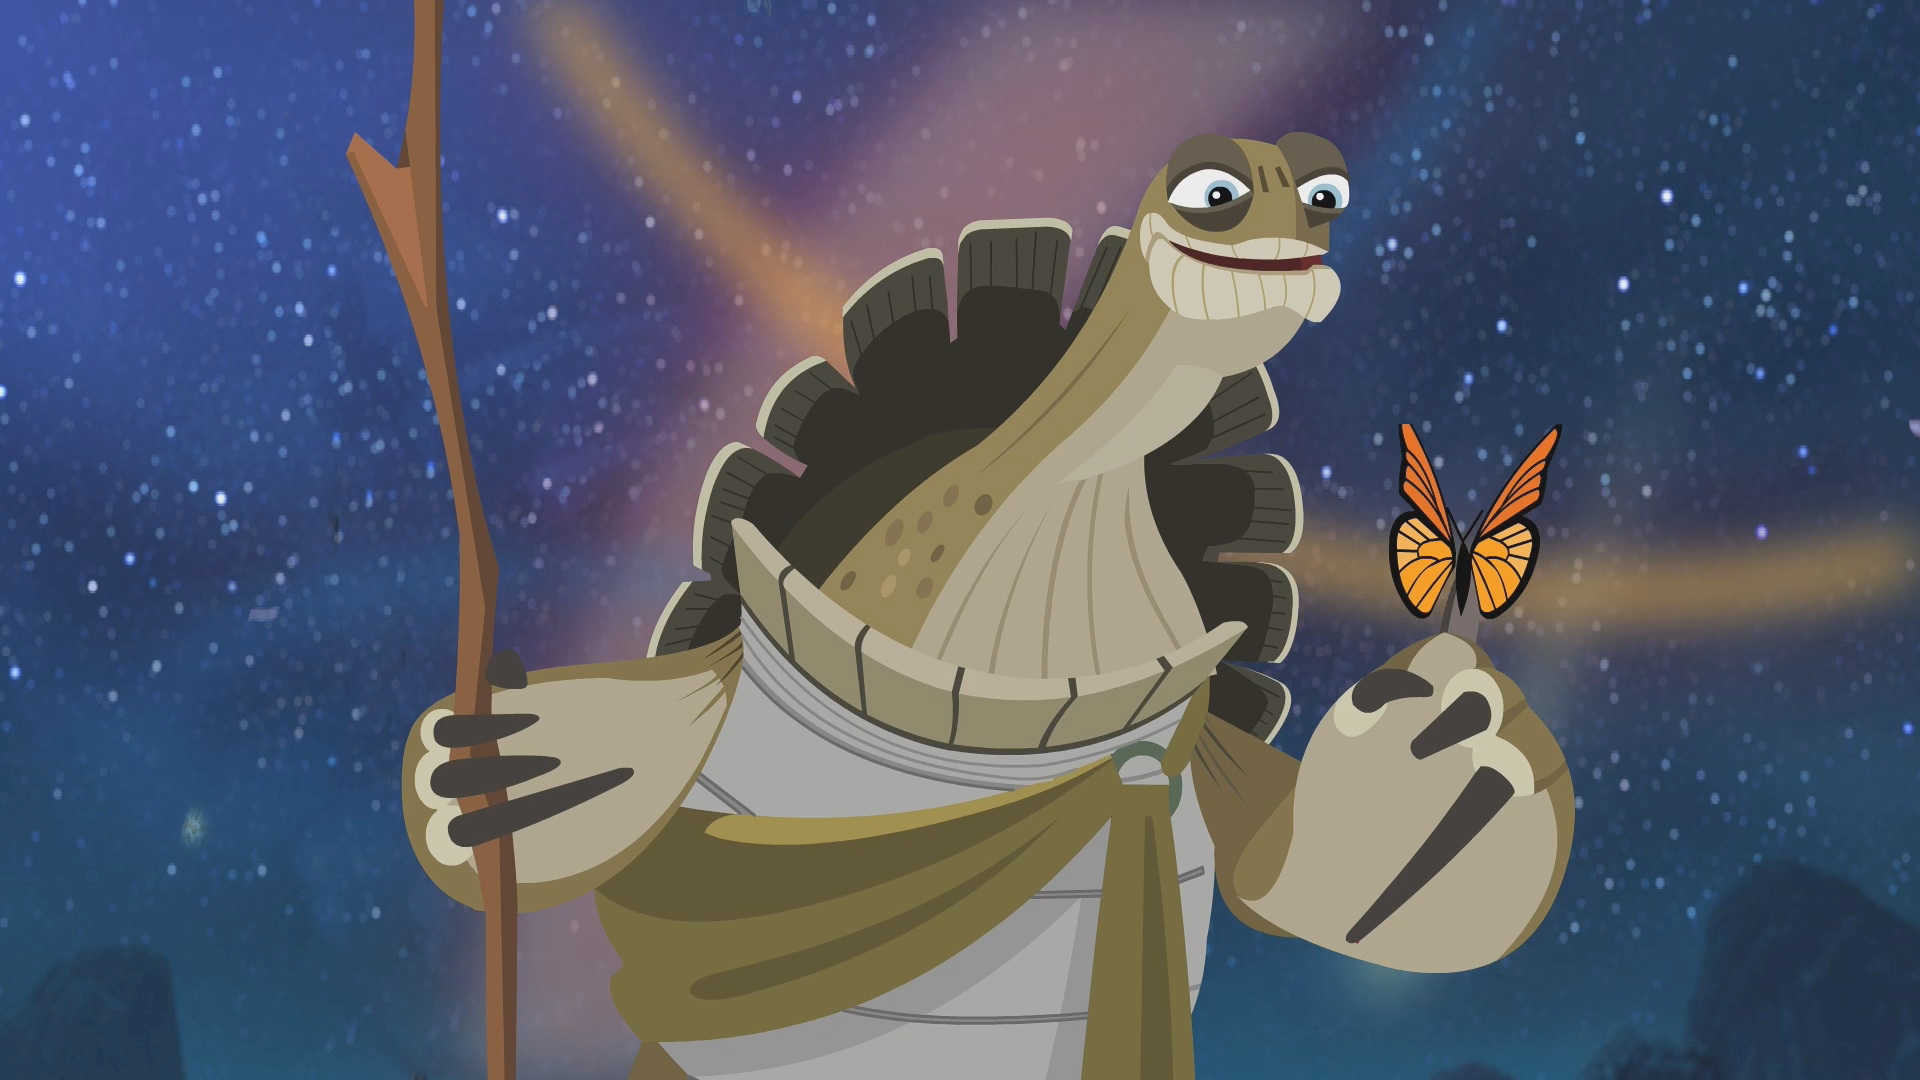 Master Oogway screenshots images and pictures  Comic Vine